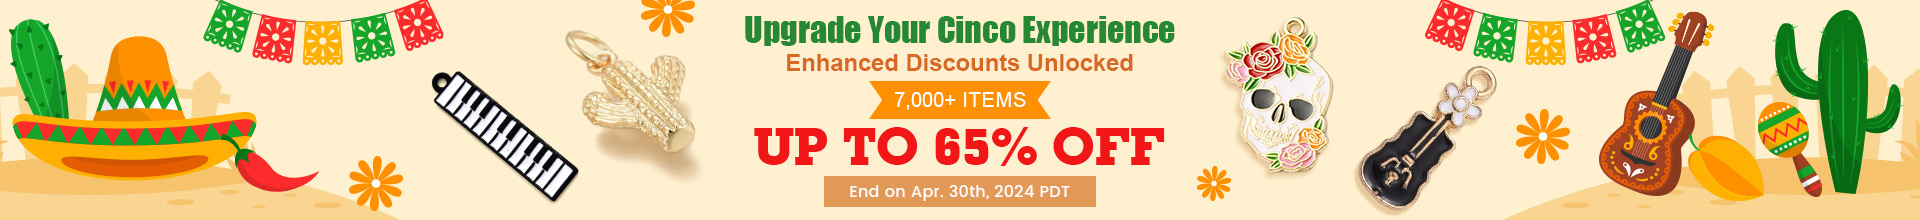 Upgrade Your Cinco Experience